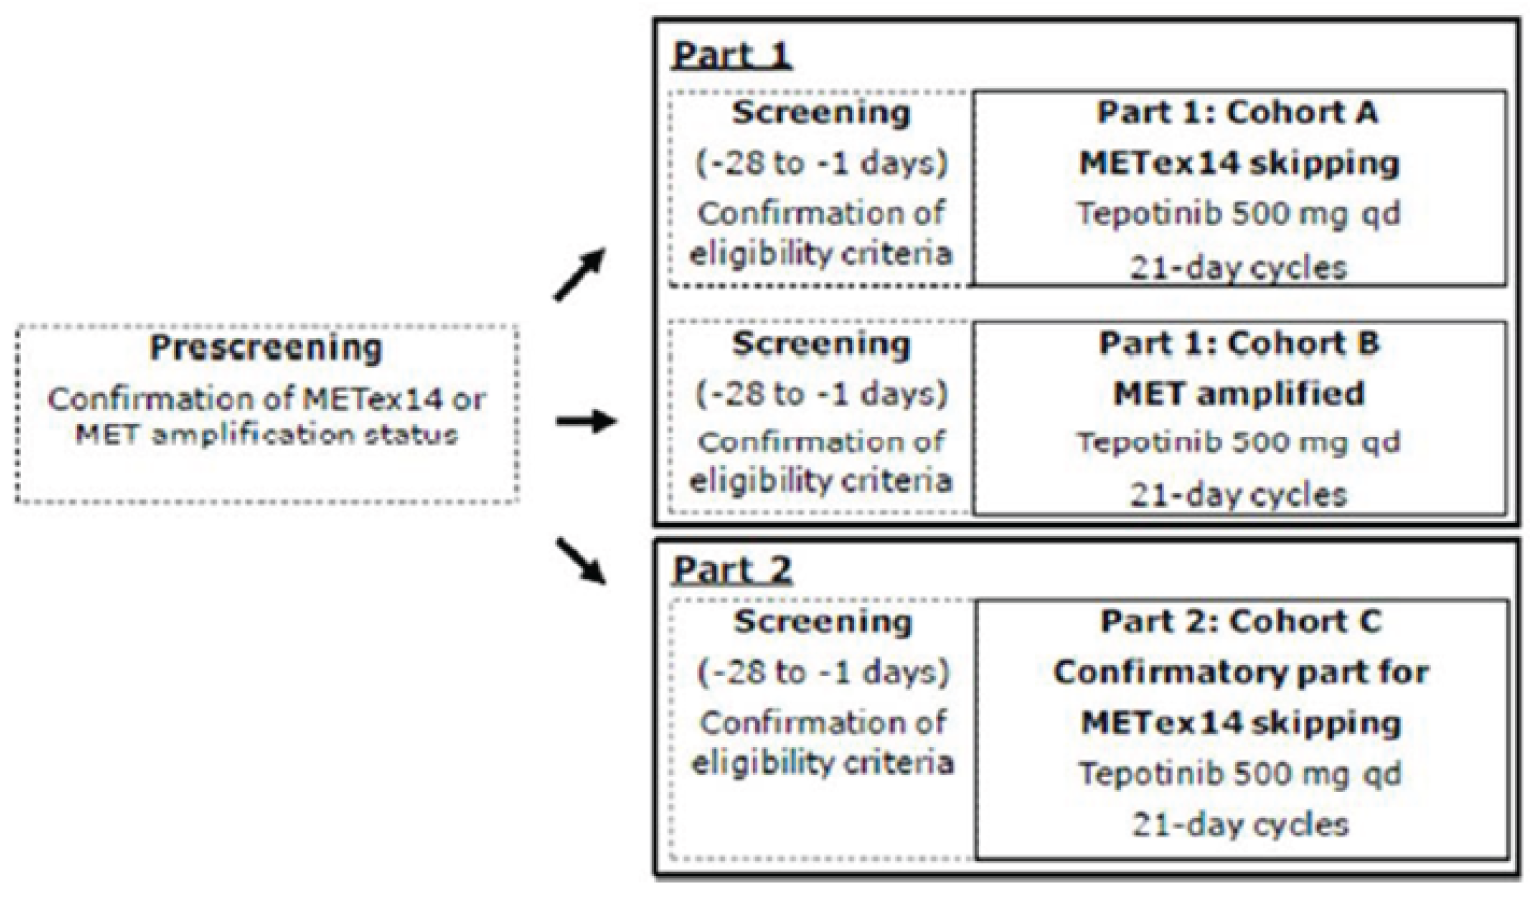 First, patients underwent pre-screening to confirm METex14 or MET amplification status. Next, all patients underwent a 28-day screening period and were treated with tepotinib hydrochloride 500 mg in 21-day cycles. Part 1 of the study consisted of the pivotal cohort A (METex14 skipping) and cohort B (MET amplification); Part 2 consisted of the confirmatory cohort C (METex14 skipping).